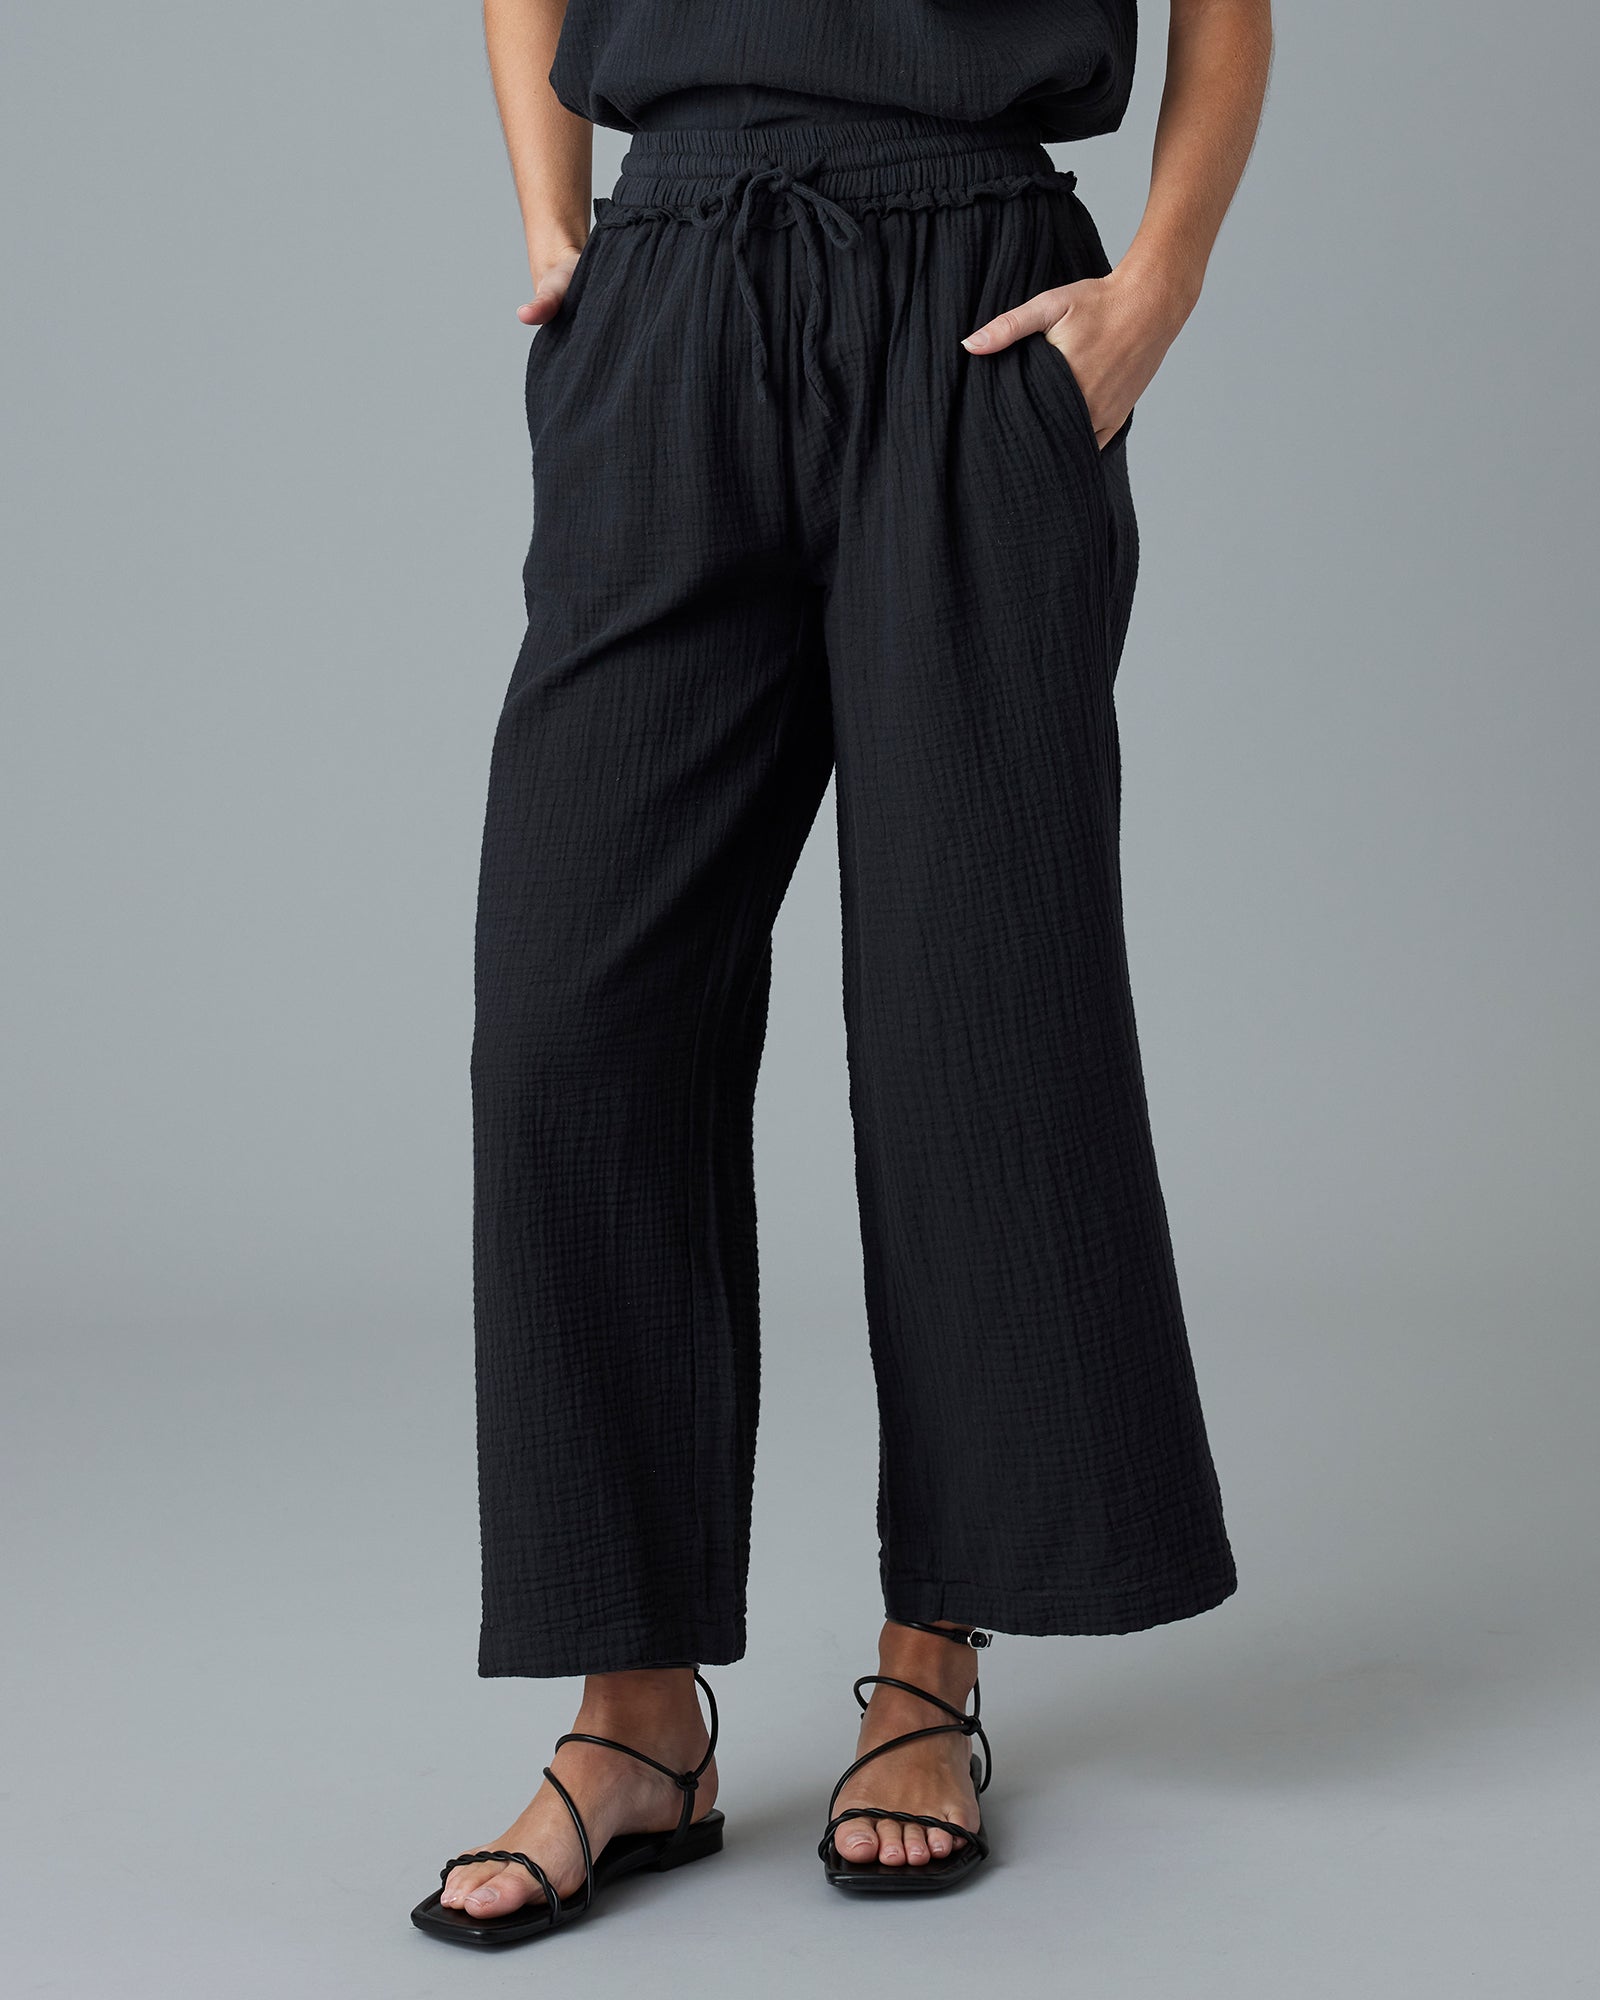 Woman in black ankle-length pants